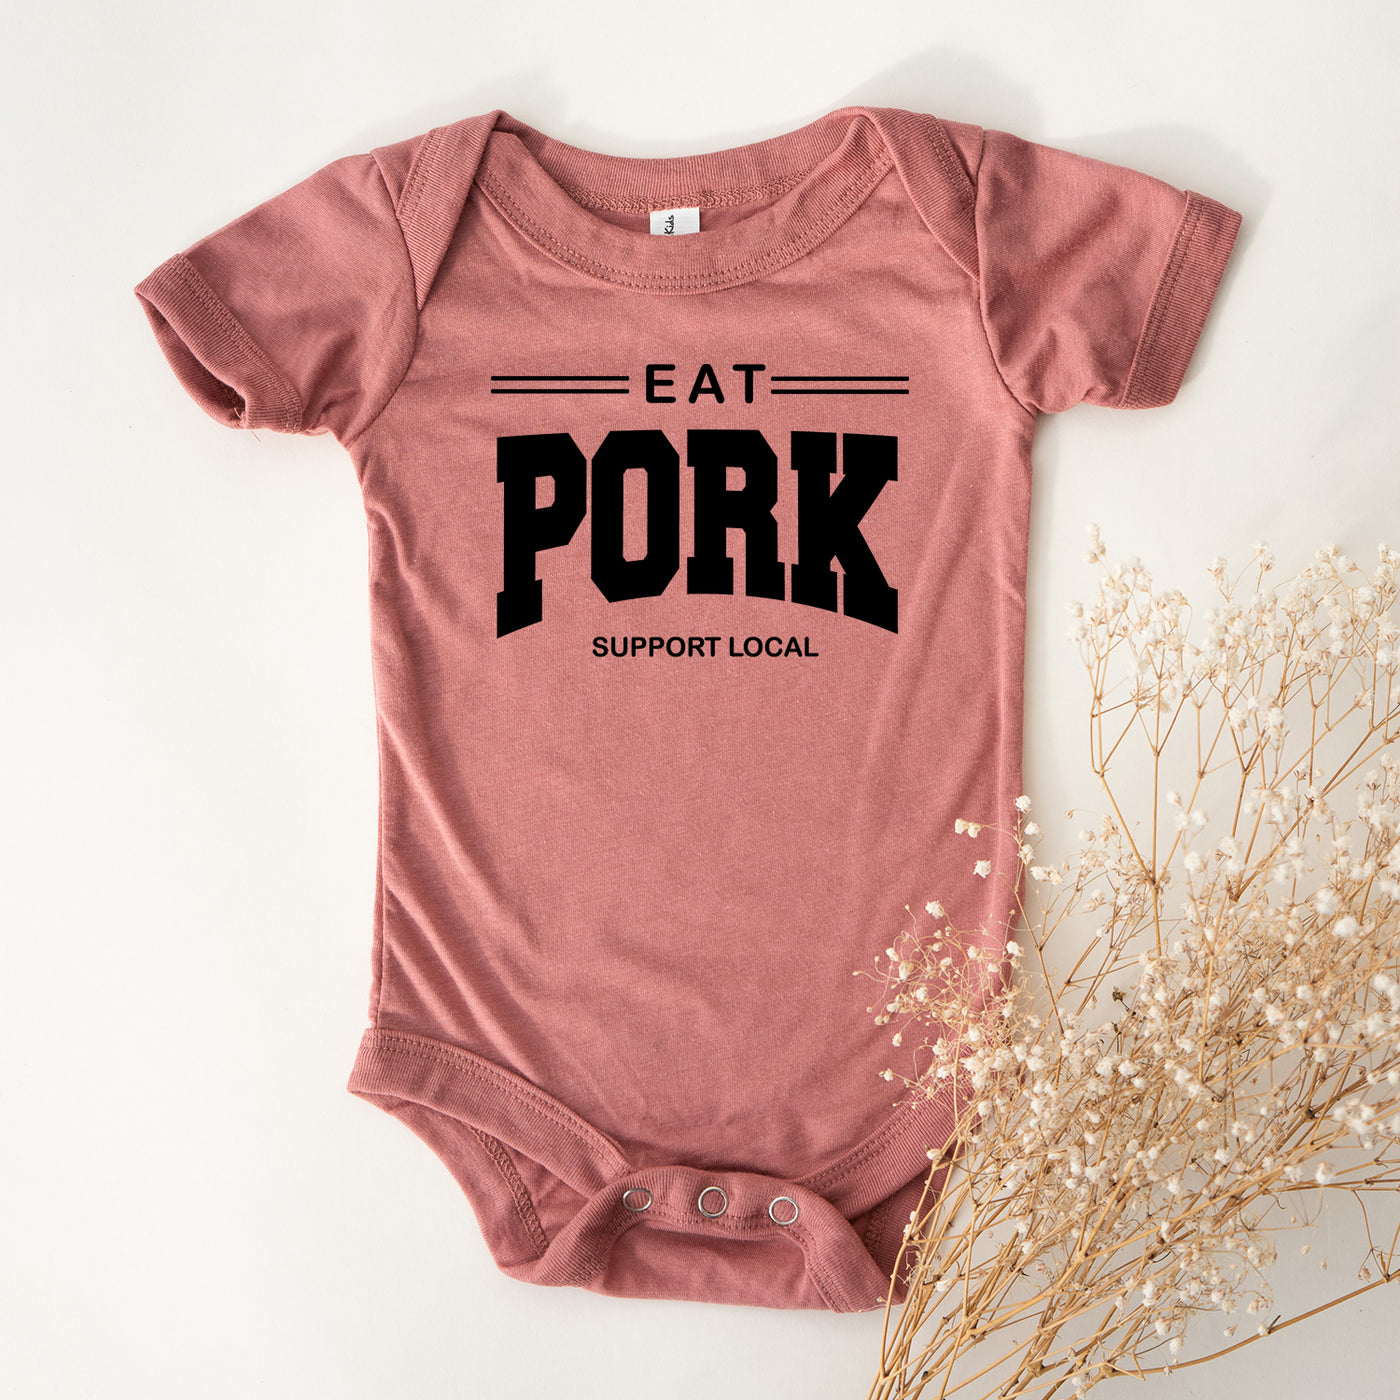 Eat Pork - Support Local One Piece/T-Shirt (Newborn - Youth XL) - Multiple Colors!